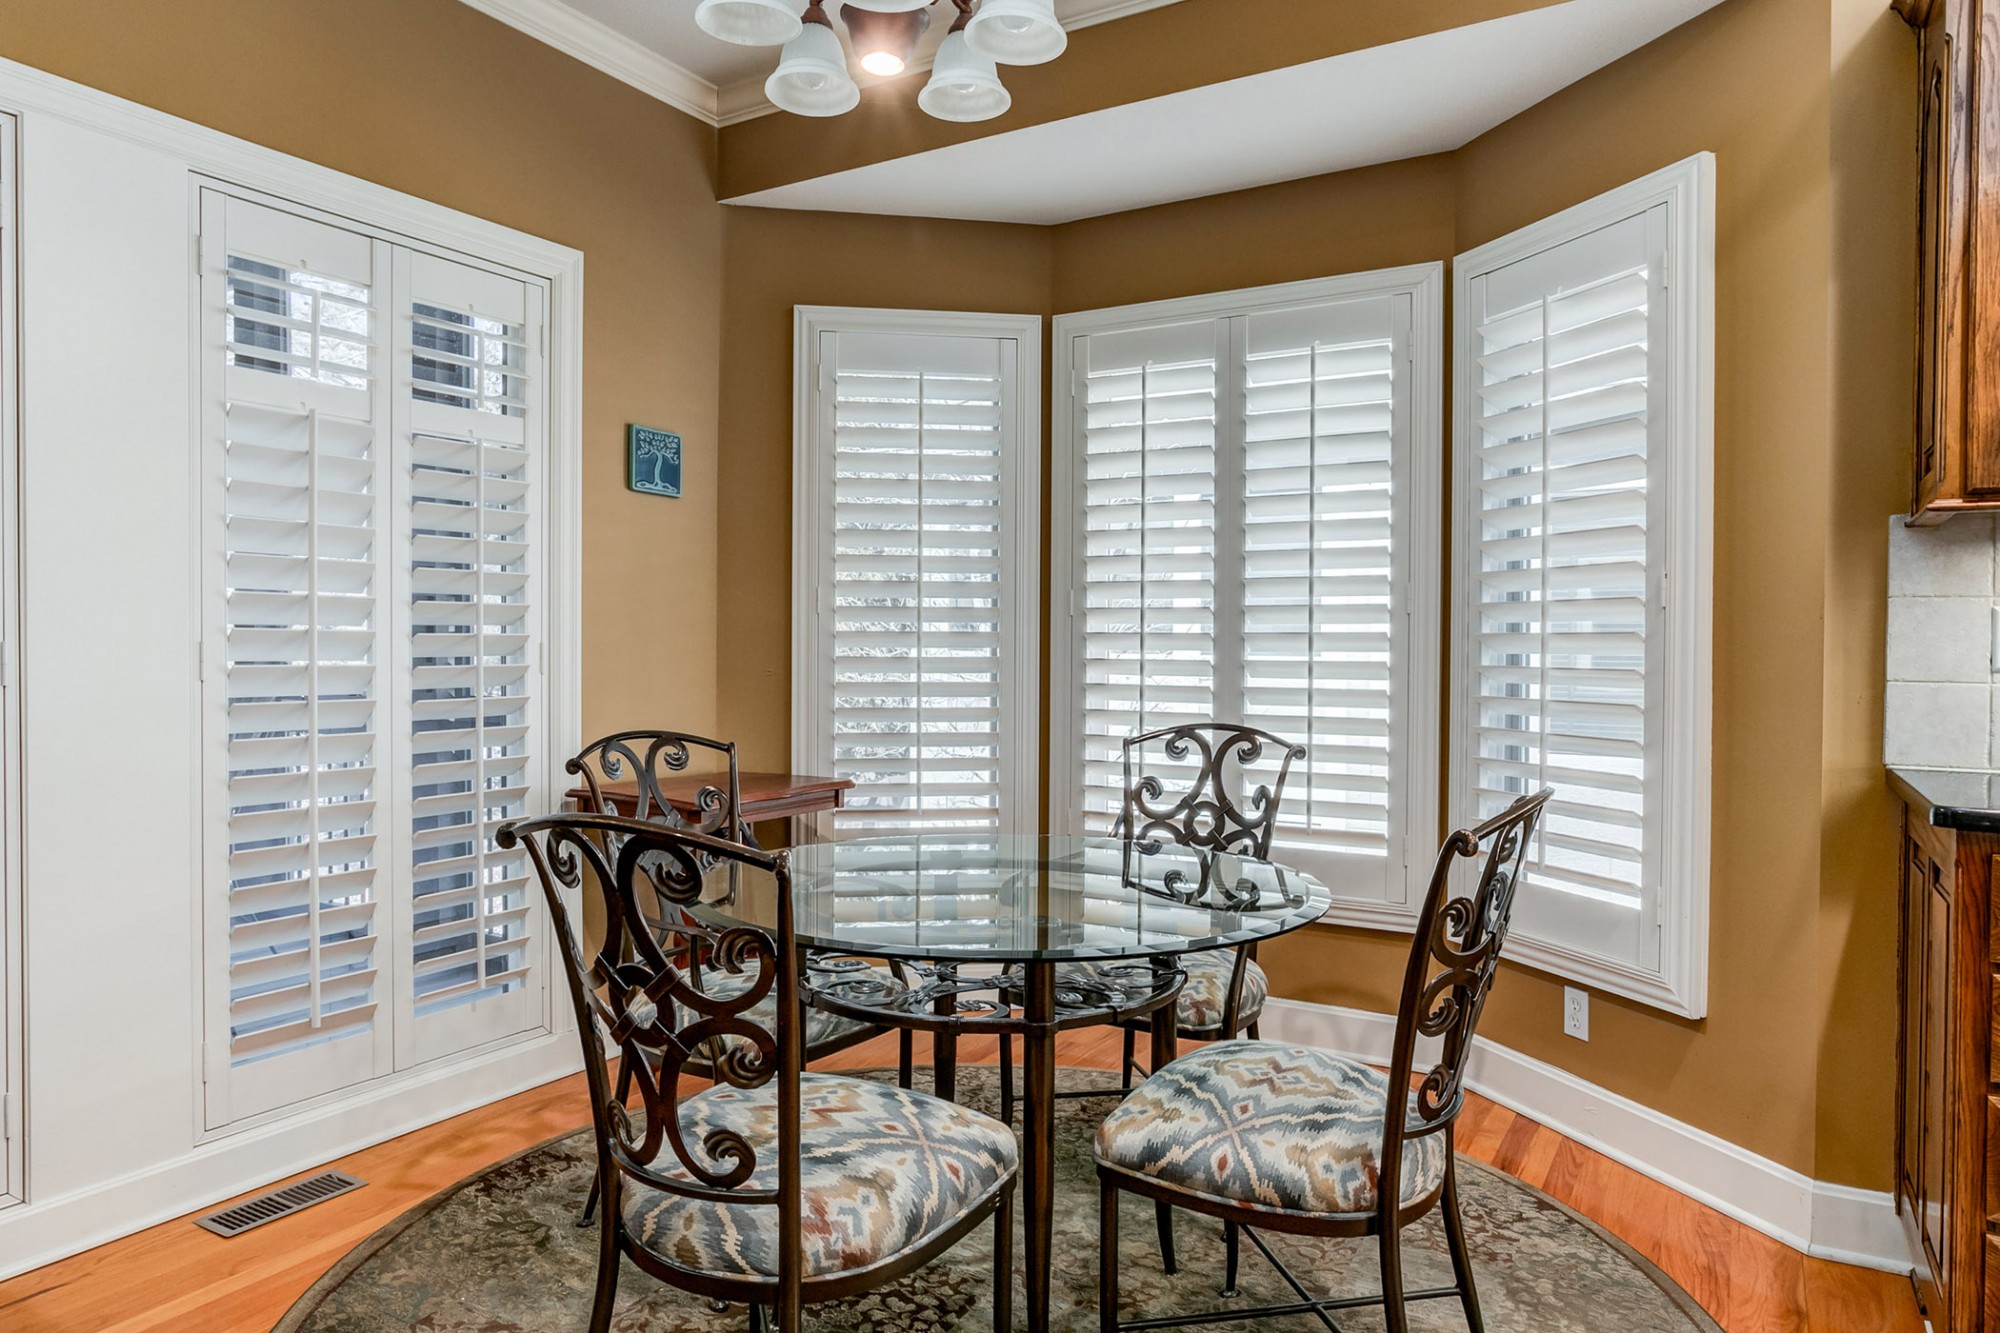 The bright & cheery breakfast area has a bay window plus a wall of windows, all featuring plantation shutters + a door opening to the screened porch.